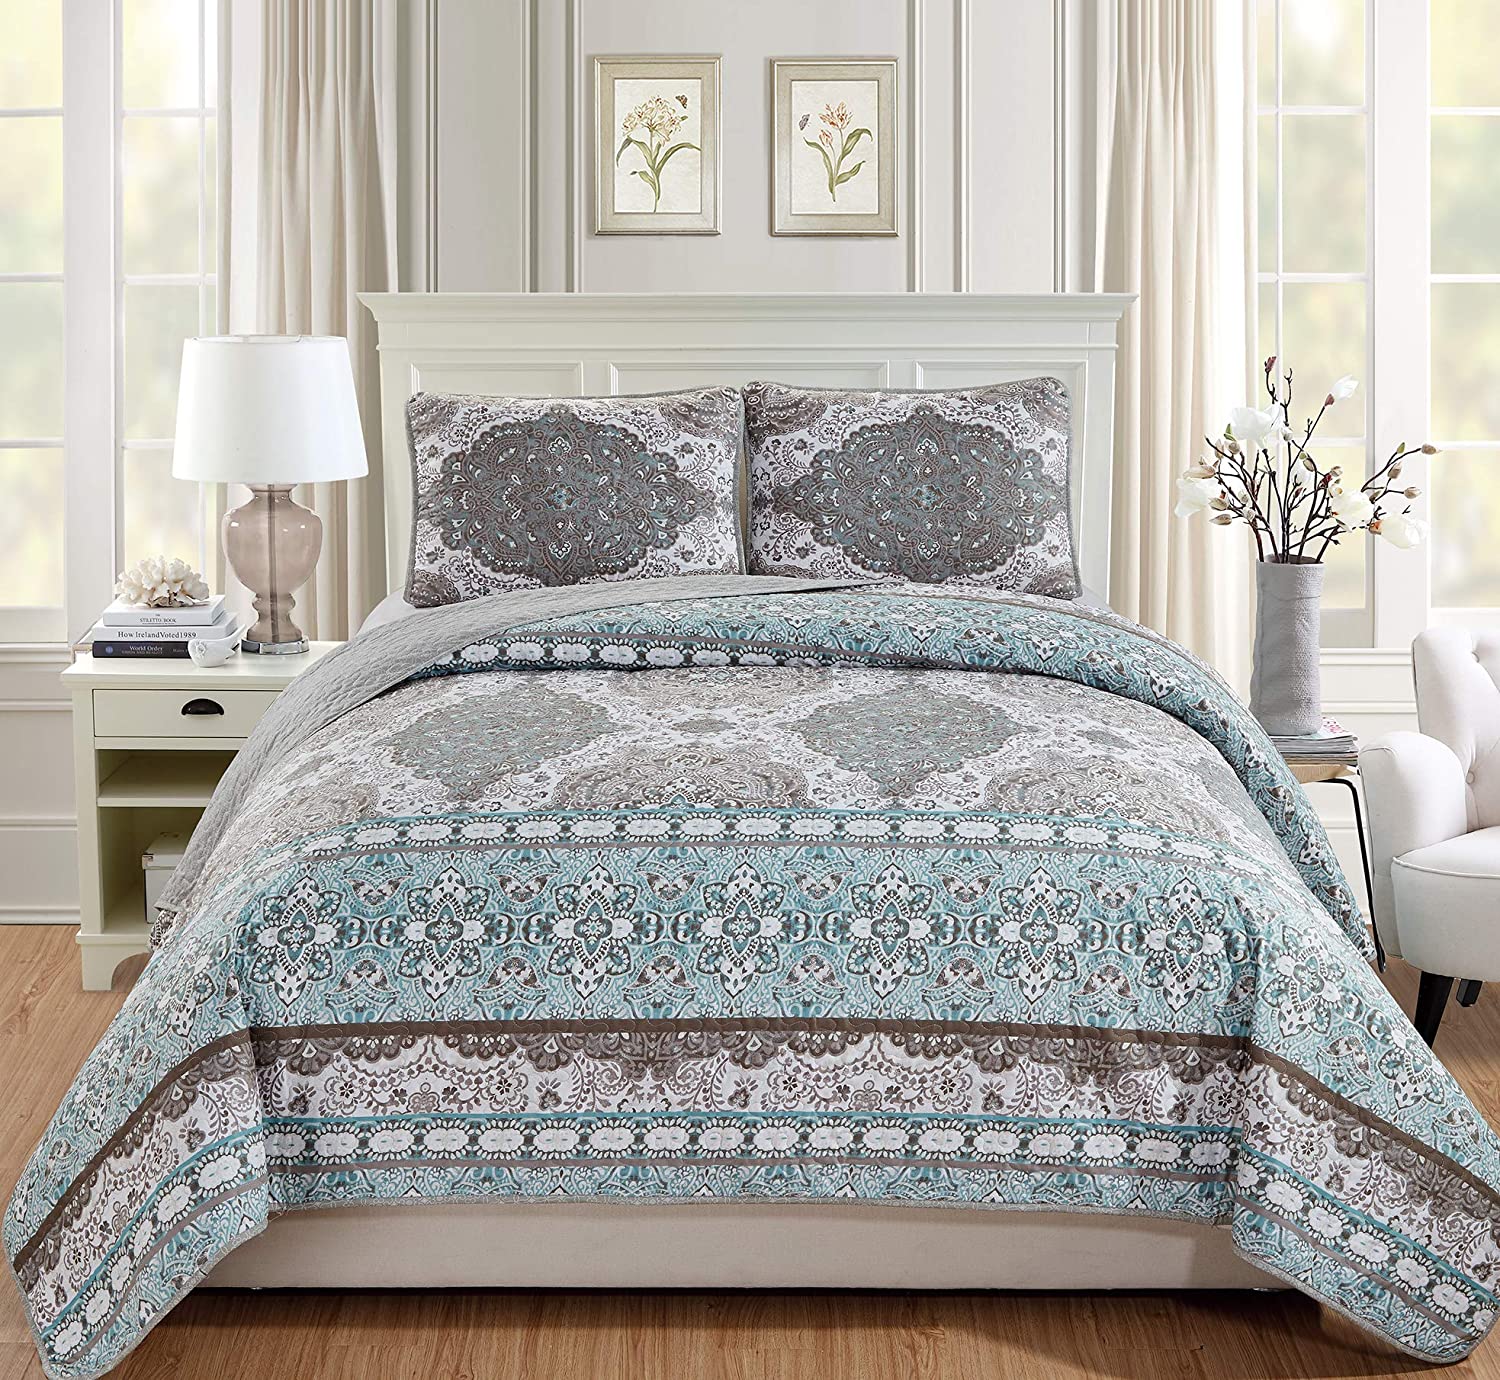 Pink Aqua Blue White Floral Patchwork 3pc Quilt Set Coverlet Twin Queen King Bed